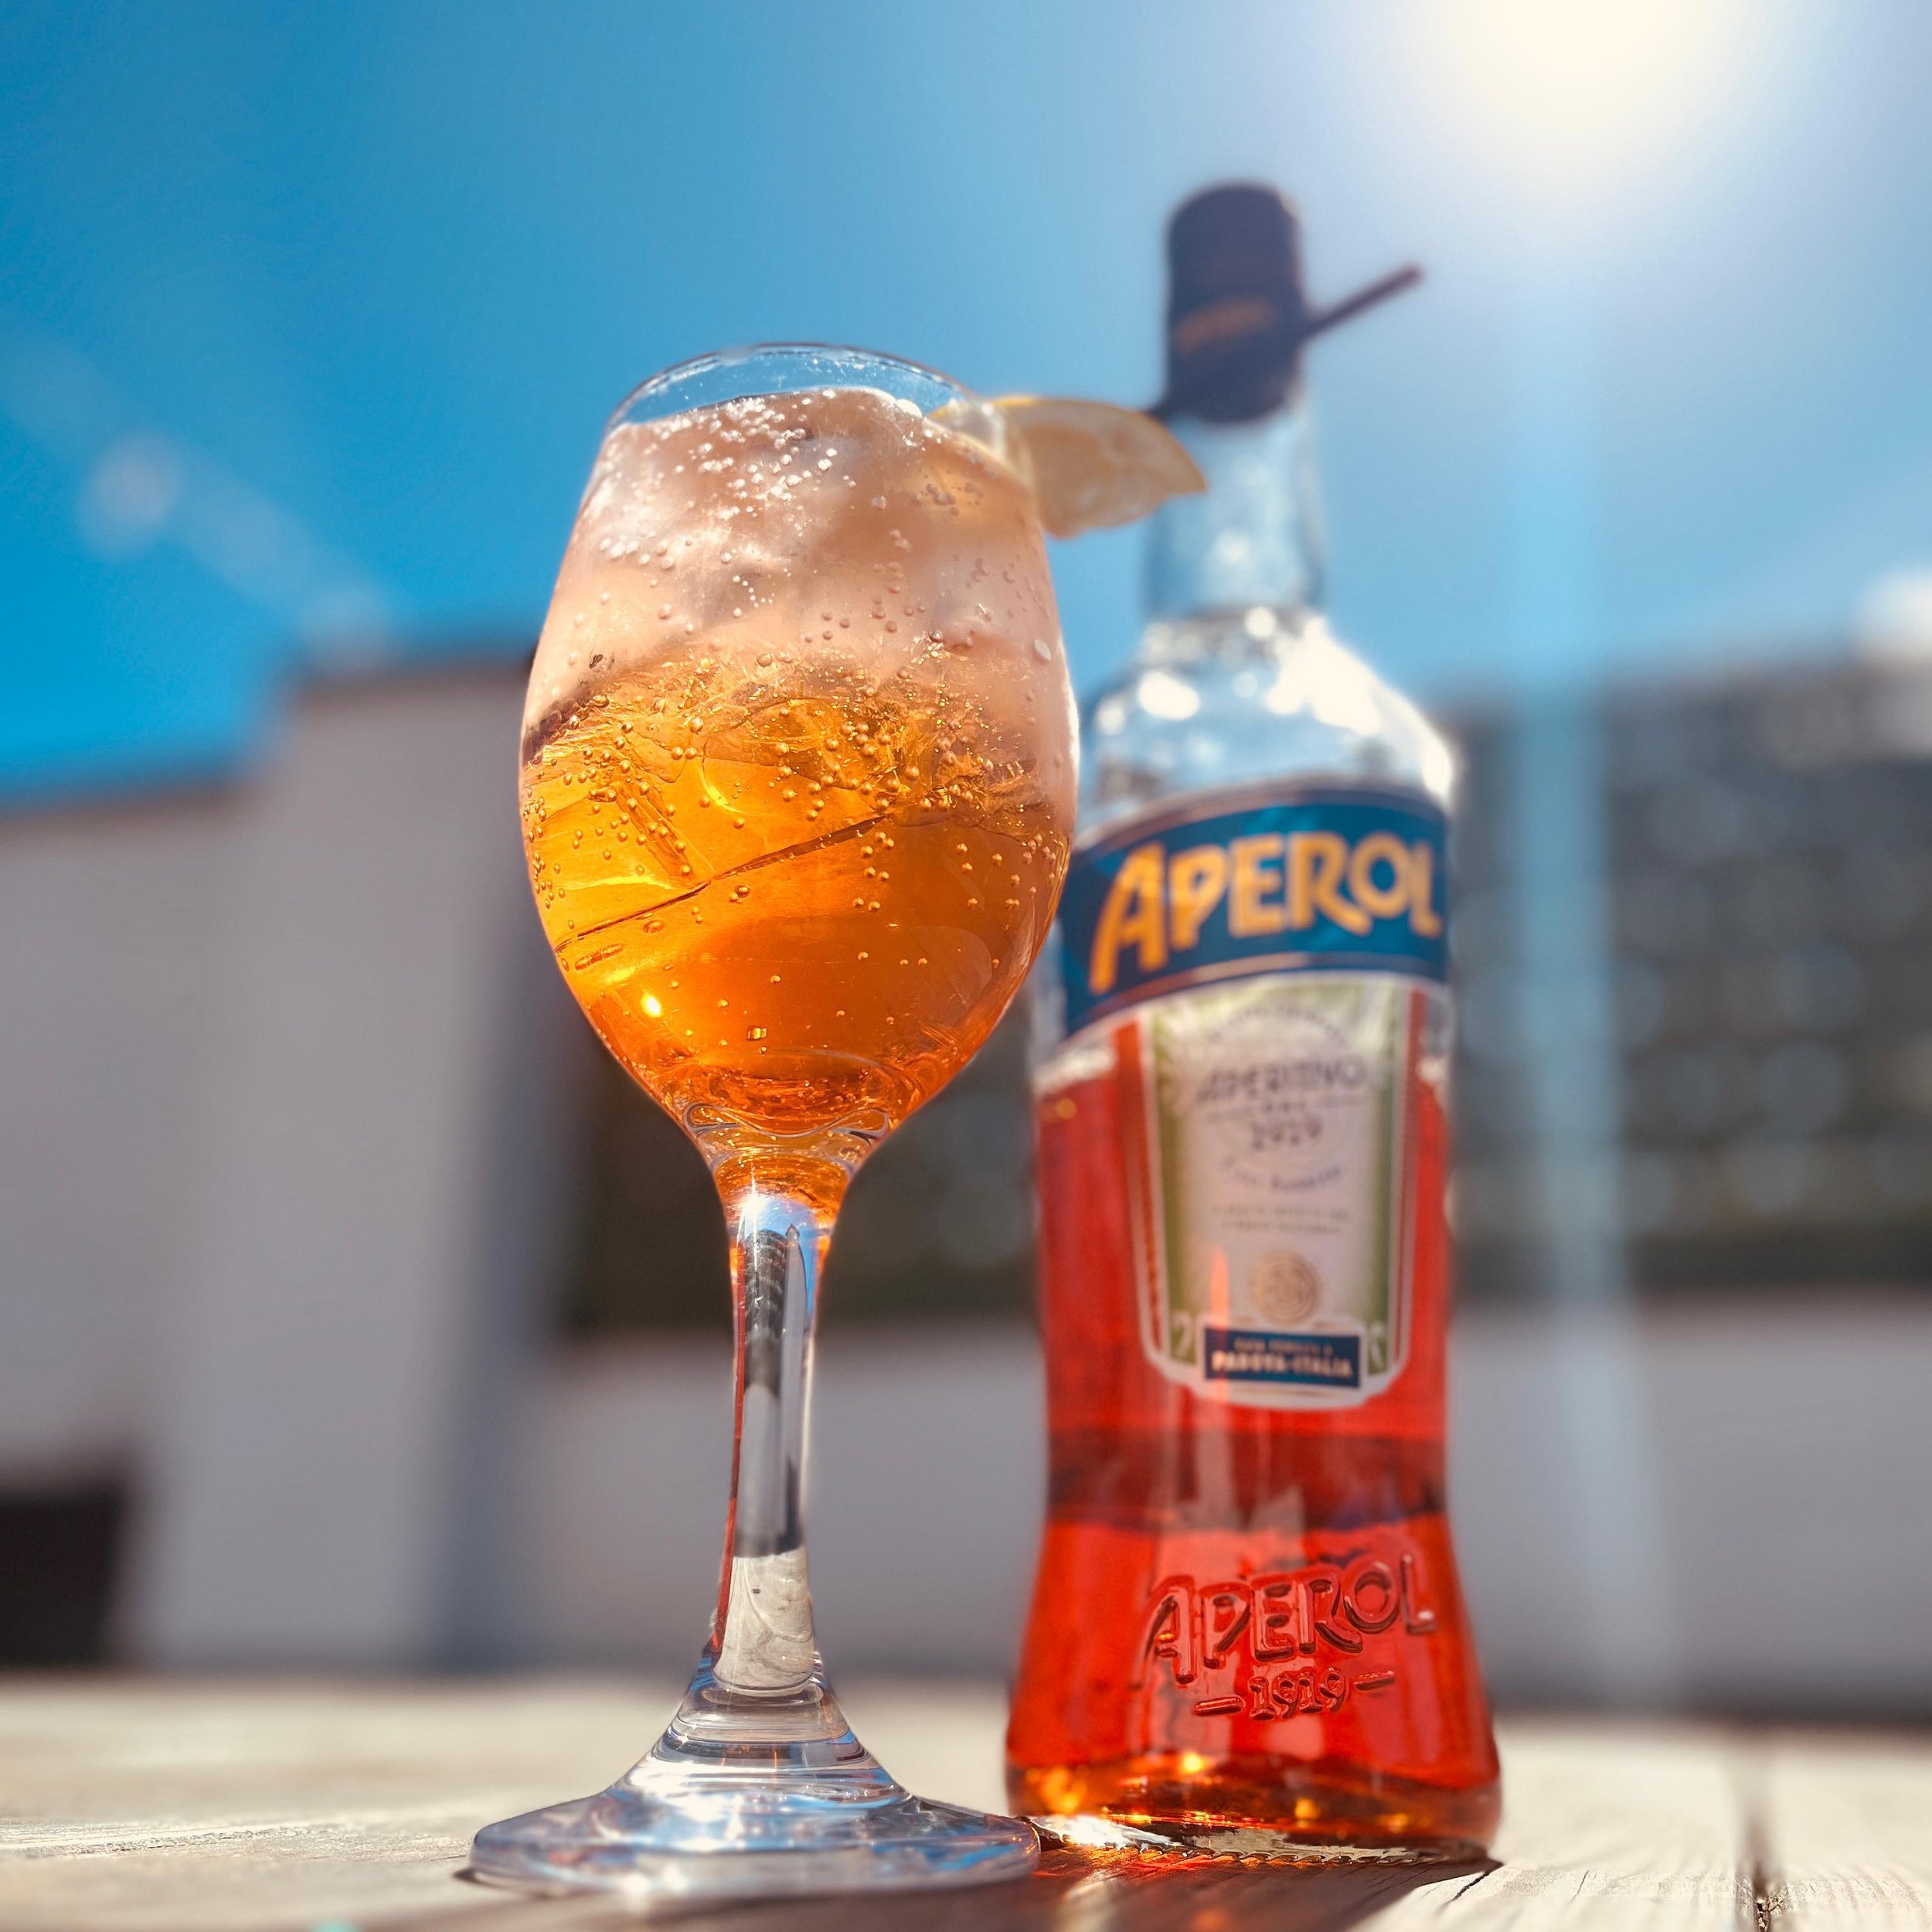 SUNS OOT! We&rsquo;ve brought the bottles of Aperol out of hibernation and dusted them off

If you are planning on heading to Bruce St today to enjoy the sun please be wary that we are still in the process of decorating. The decking area up the back 